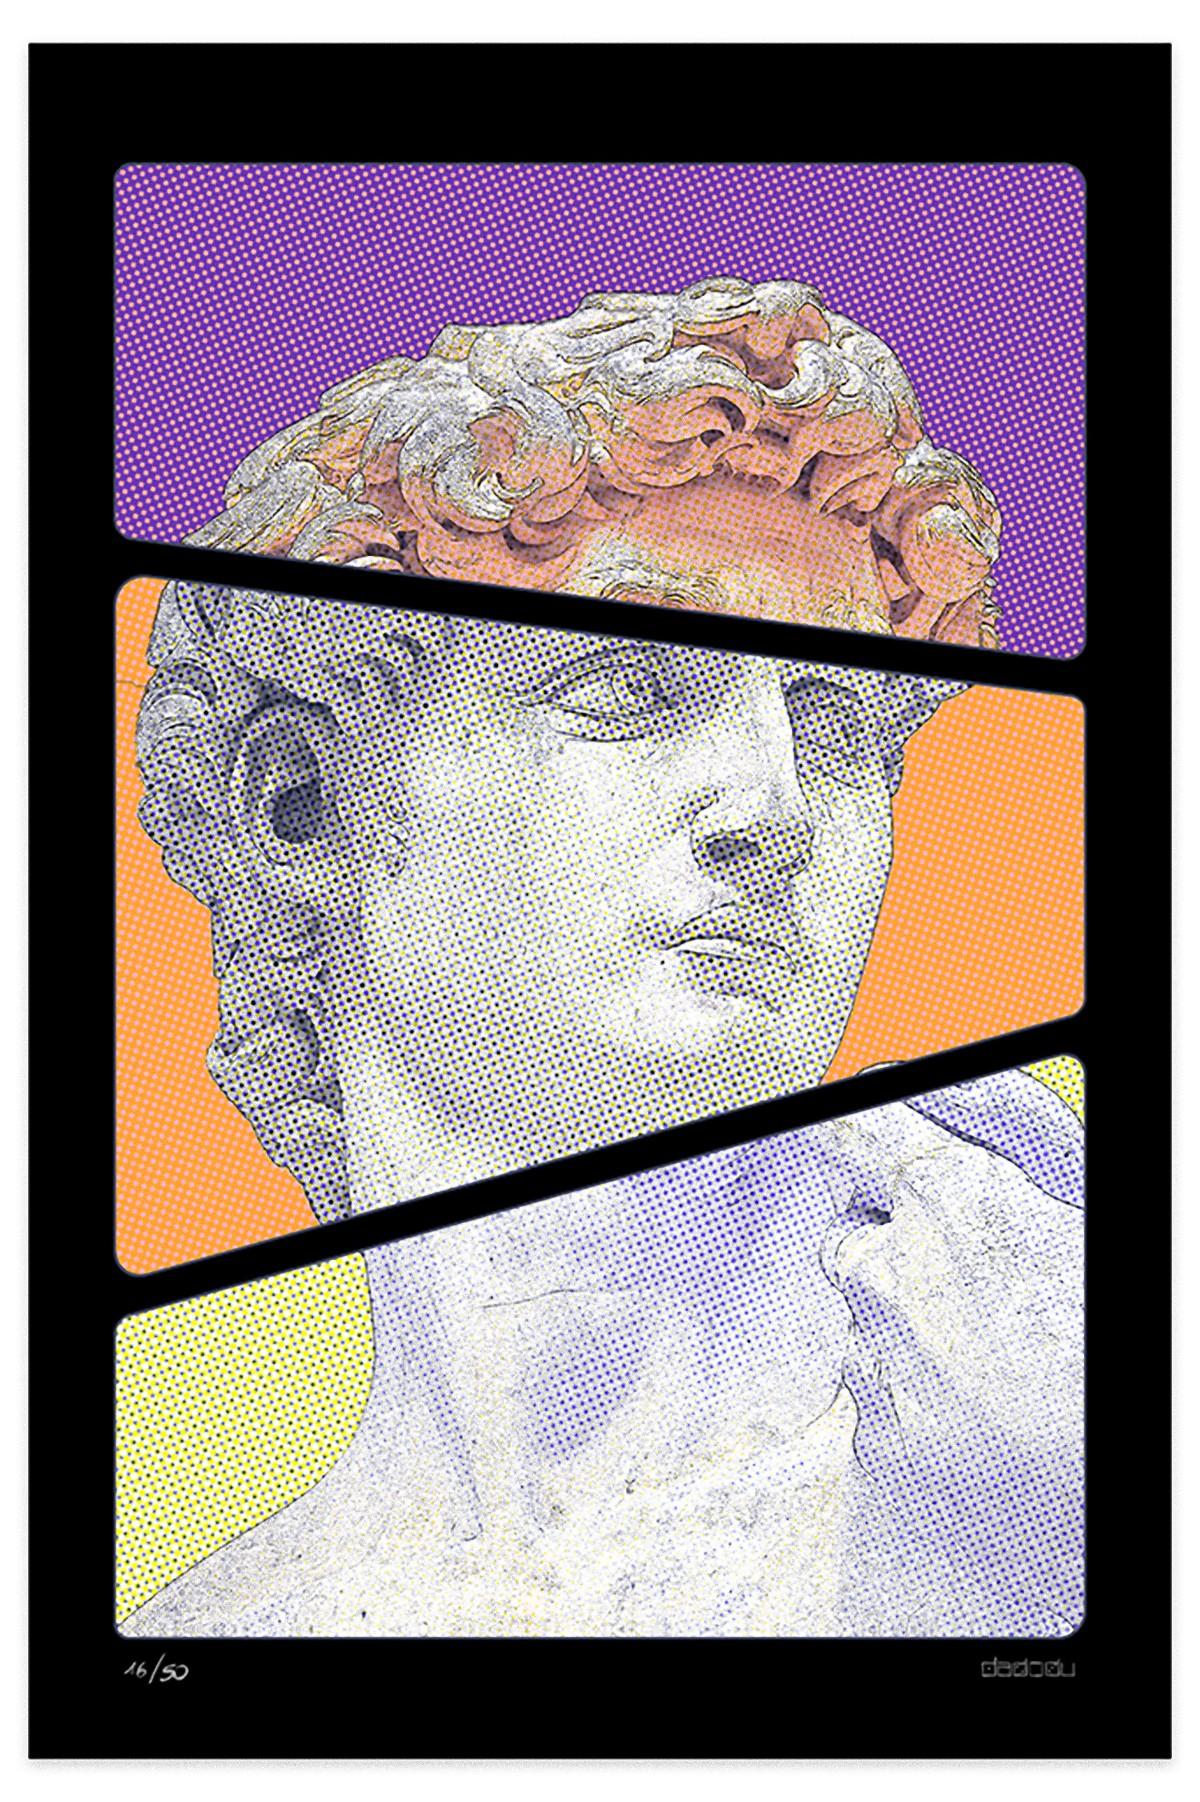 After Michelangelo  is a wonderful  giclée print realized by the contemporary artist  Dadodu  in 2008.

This original artwork is a reinterpretation of famous sculpture of the David  by Michelangelo  in a contemporary key with a close-up on the